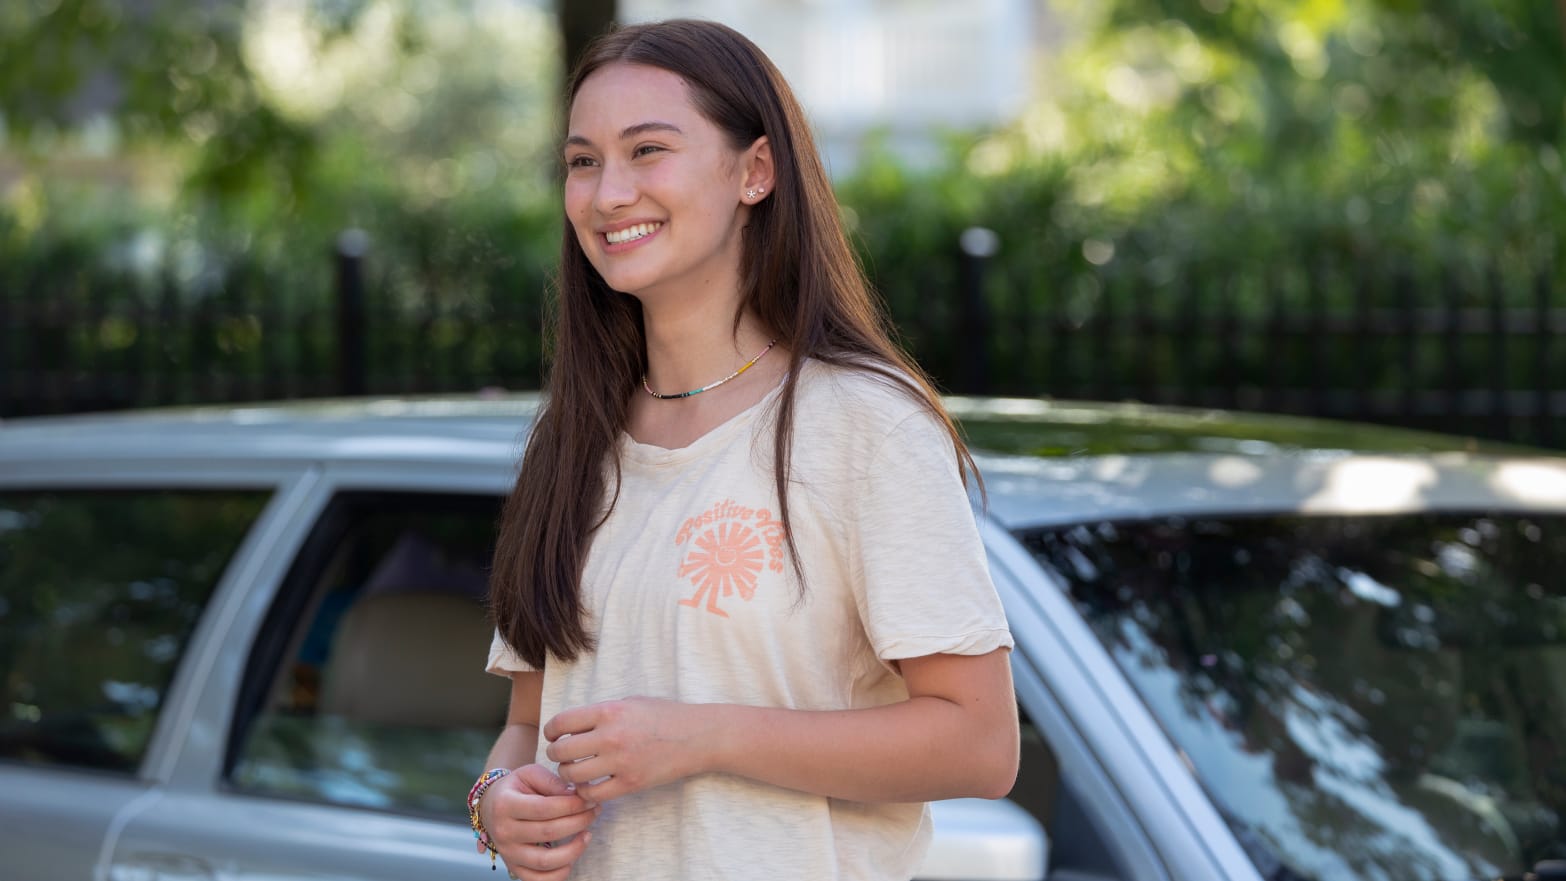 A girl with long brown hair and a white T-shirt smiles.